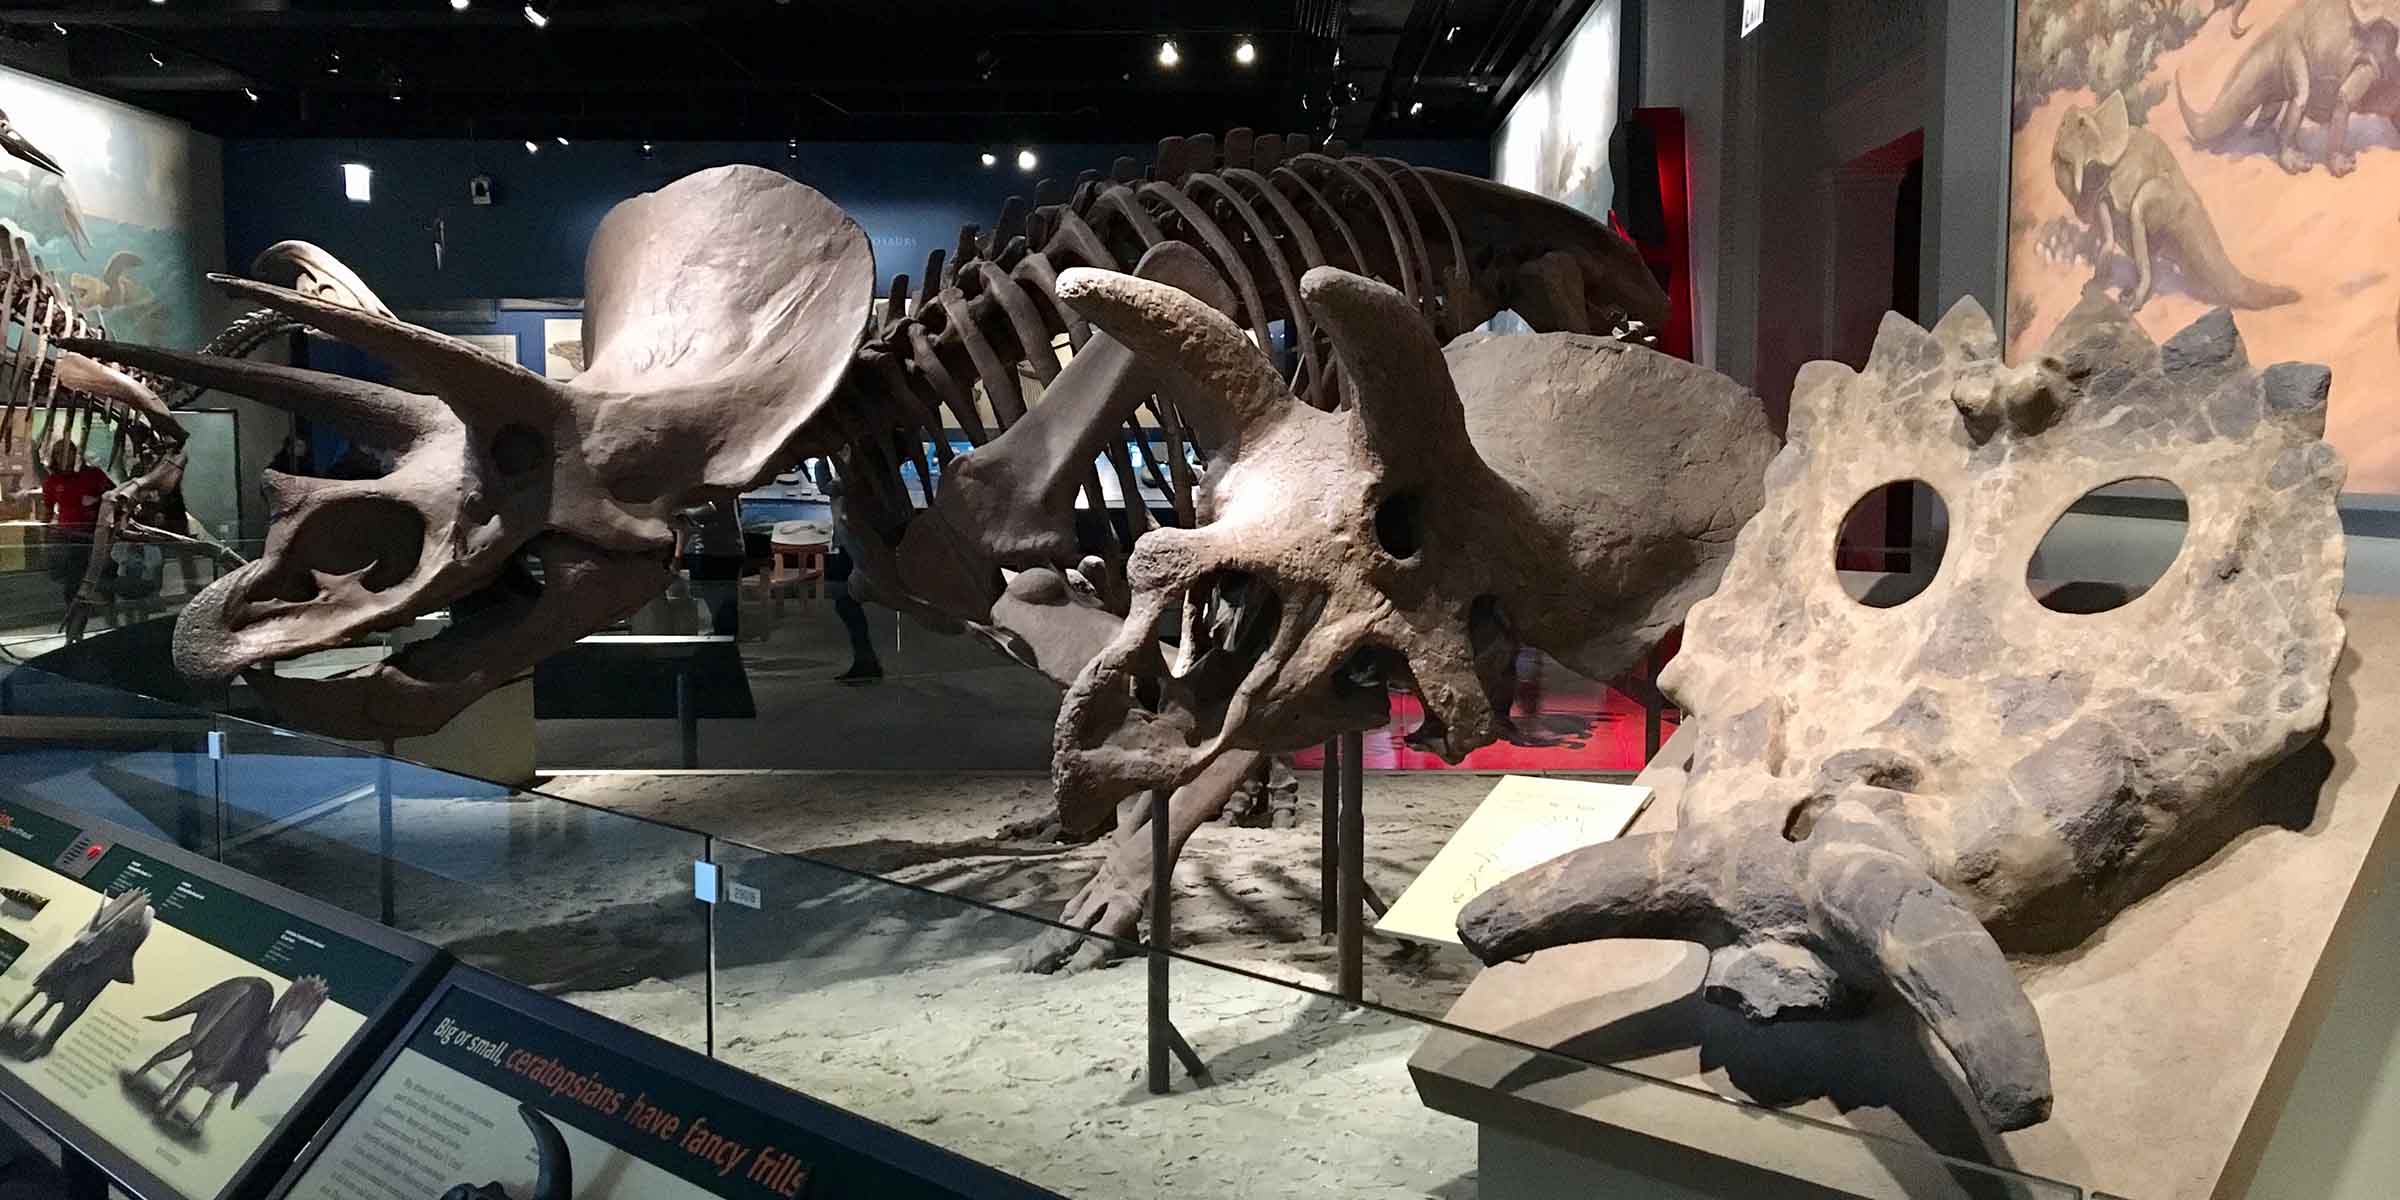 Three dinosaur skeletons with different horns on their heads, lined up in an exhibition